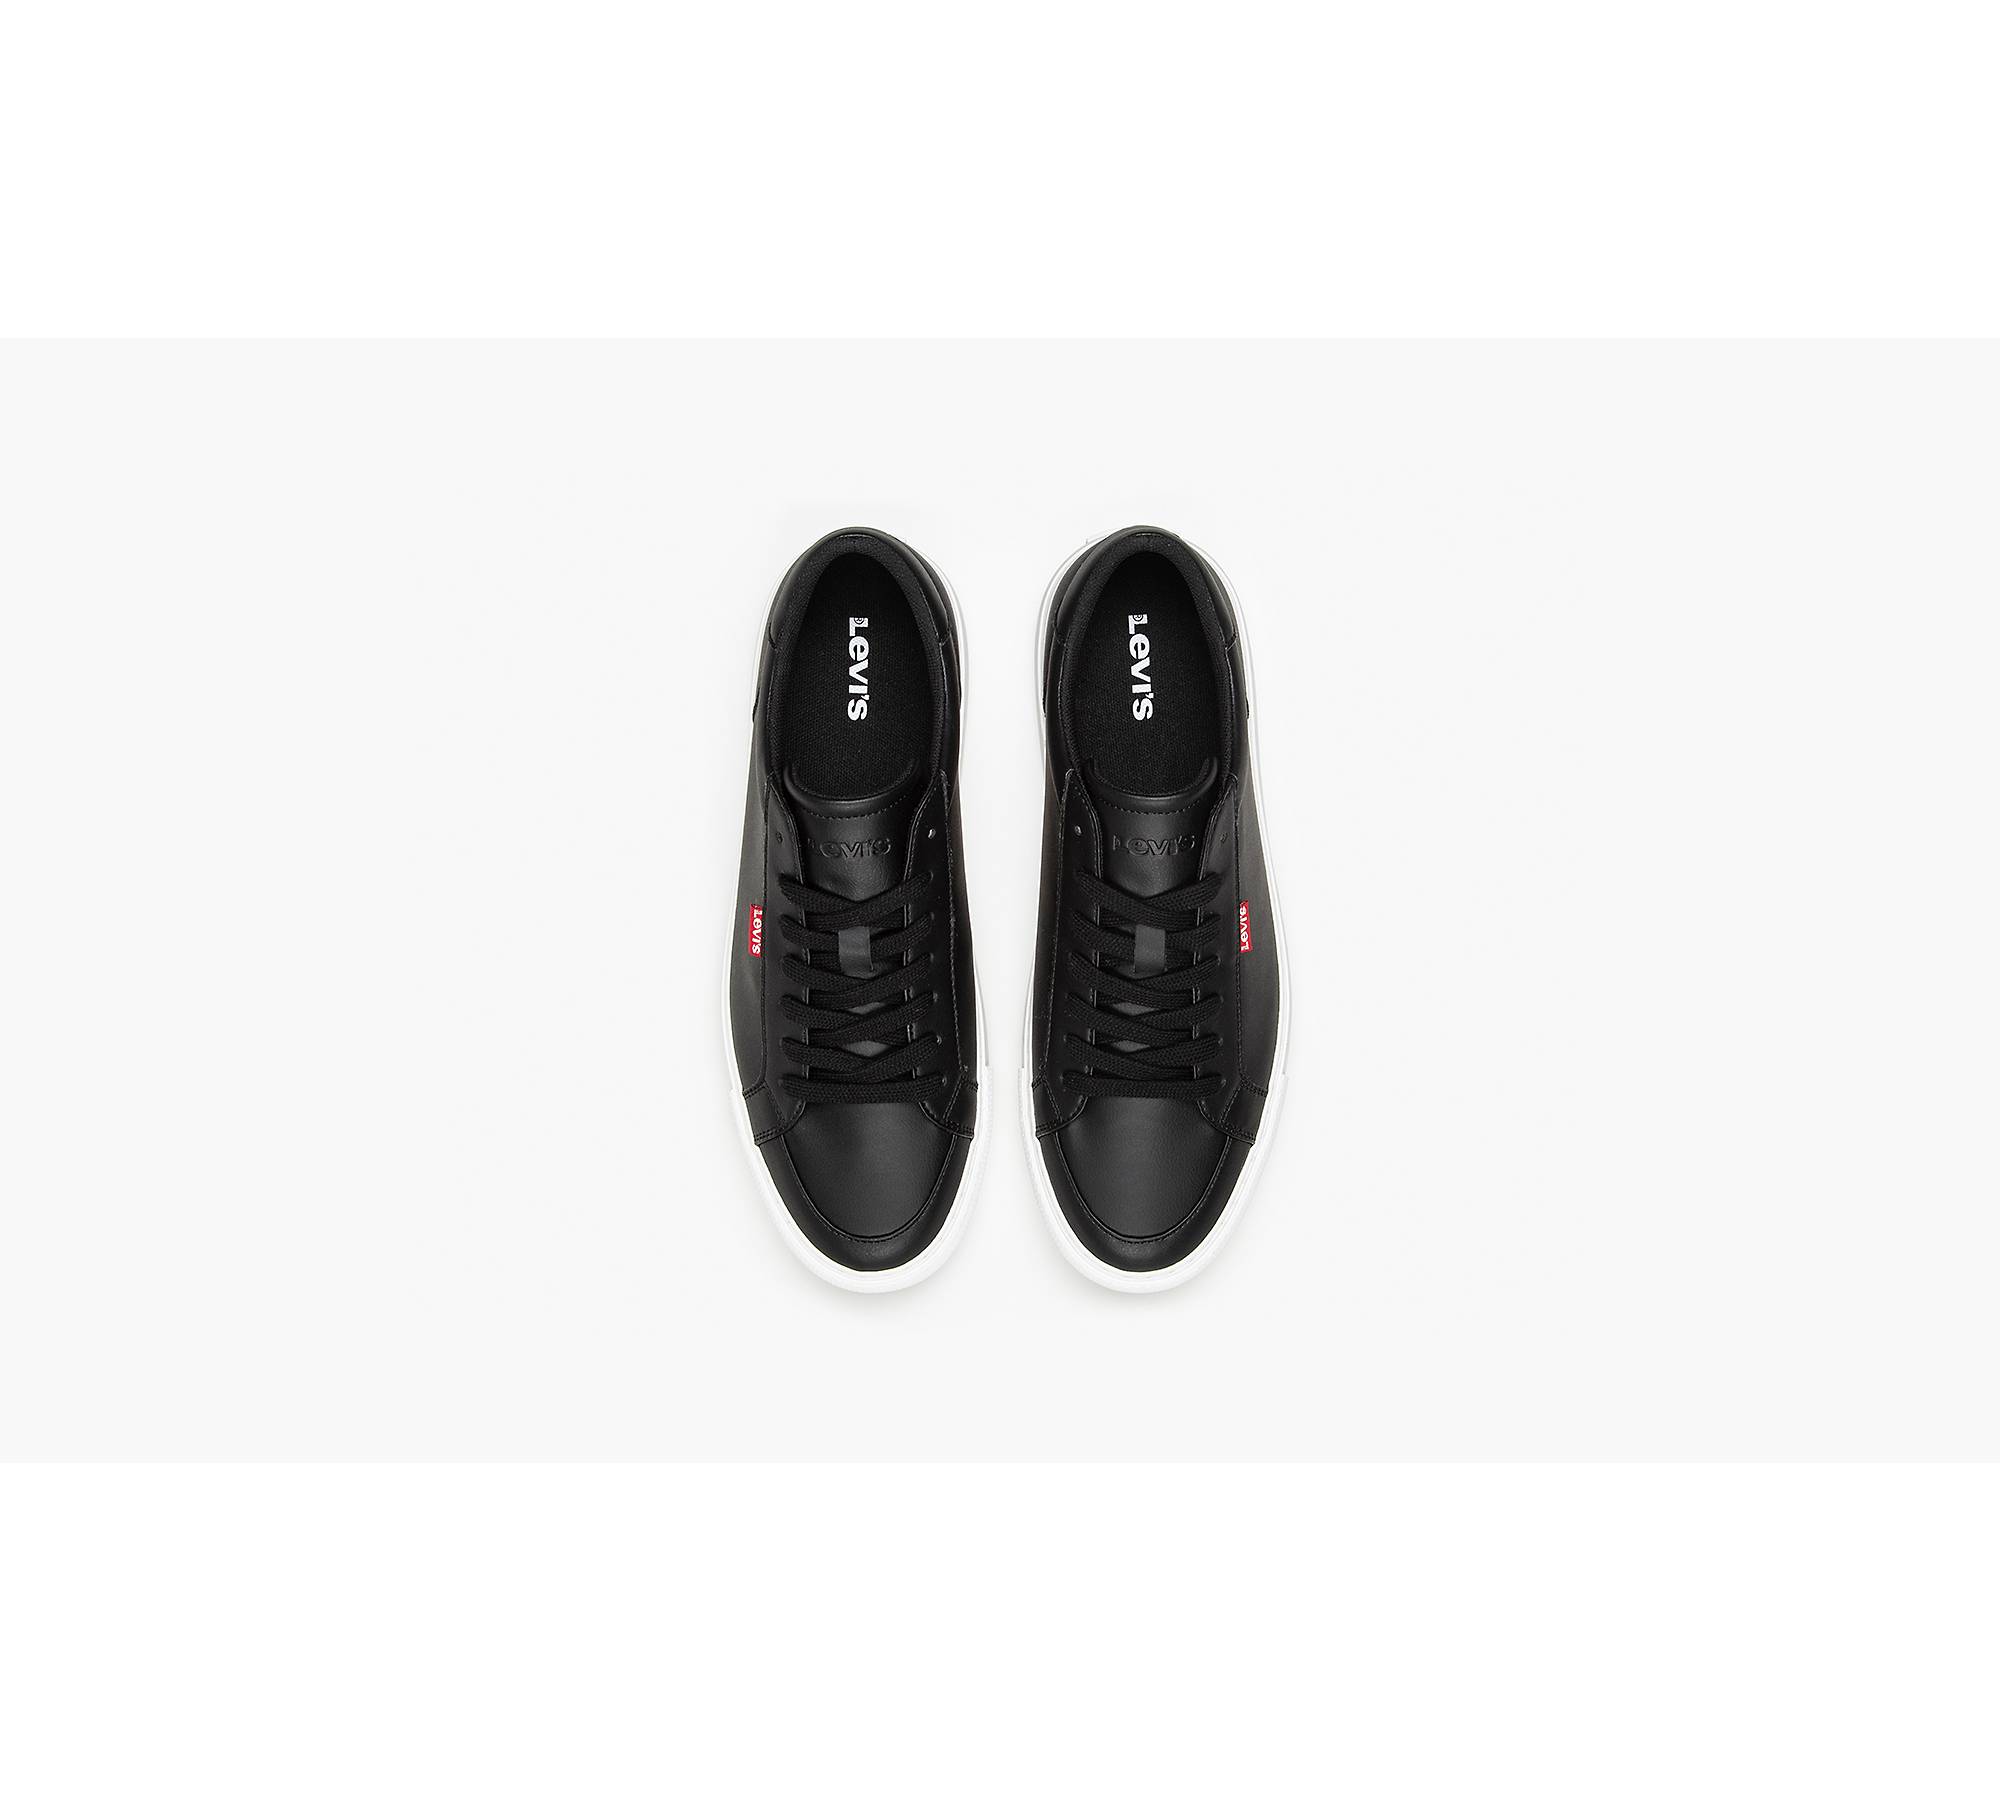 Woodward Rugged Low Sneakers - Black | Levi's® FI